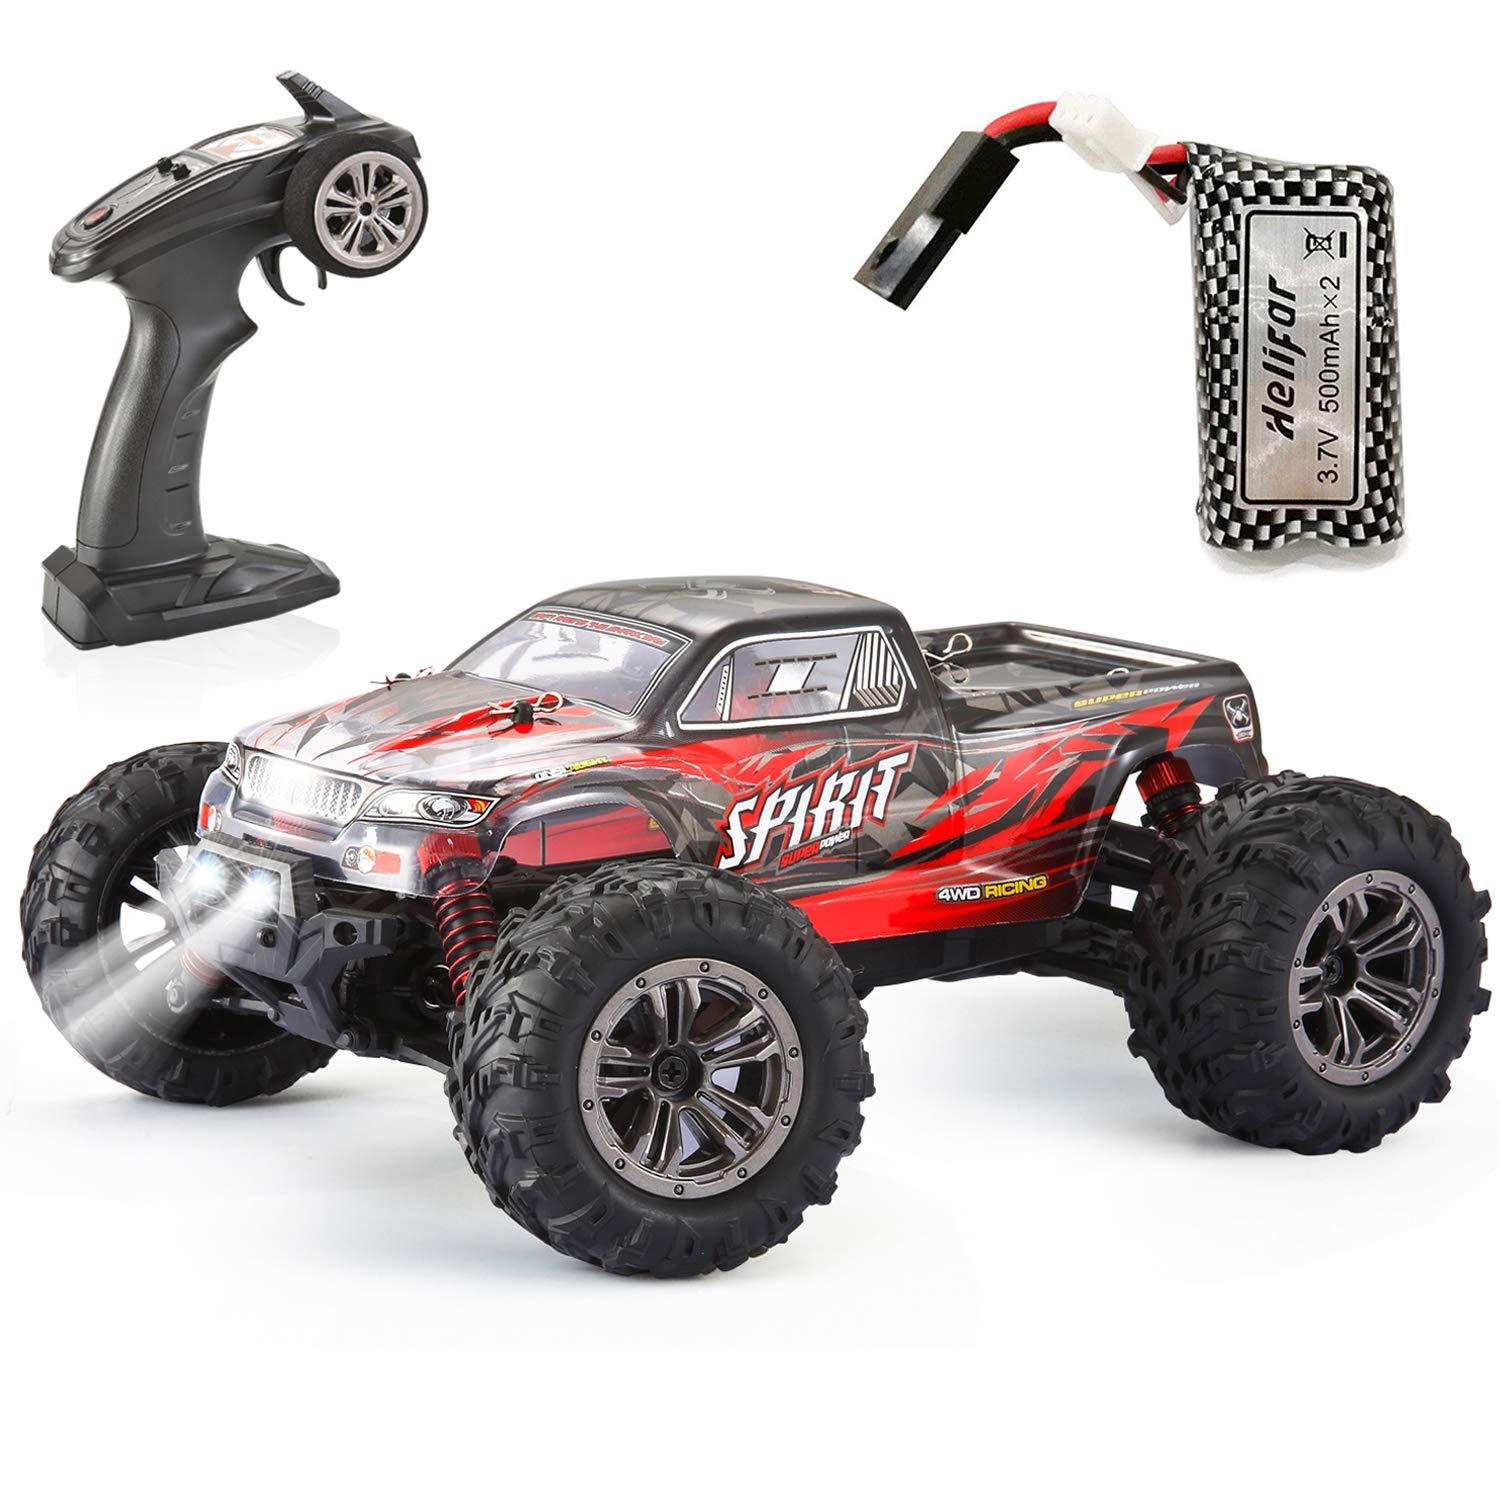 Vatos Remote Control Car: Top-of-the-Line Features and Performance for Endless Off-Road Fun - The Vatos Remote Control Car